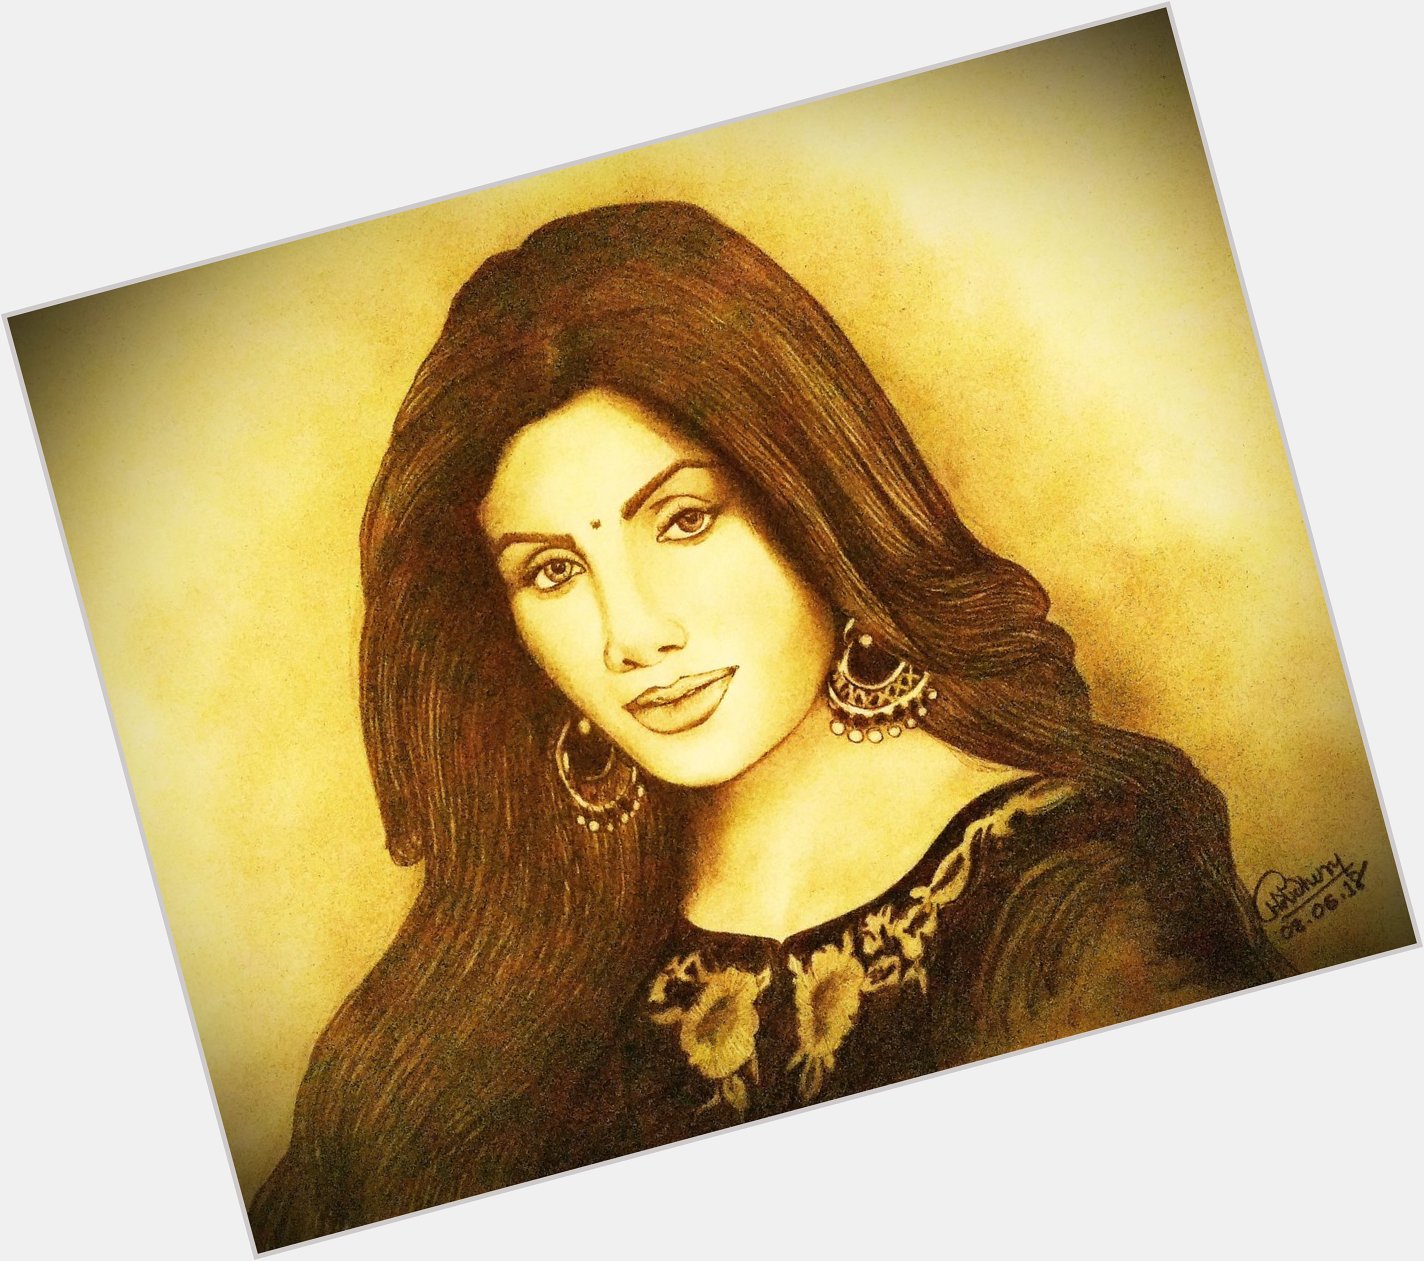 Happy birthday to the bollywood actress Shilpa Shetty.....
.
.art by me
A samll gift from my side. 